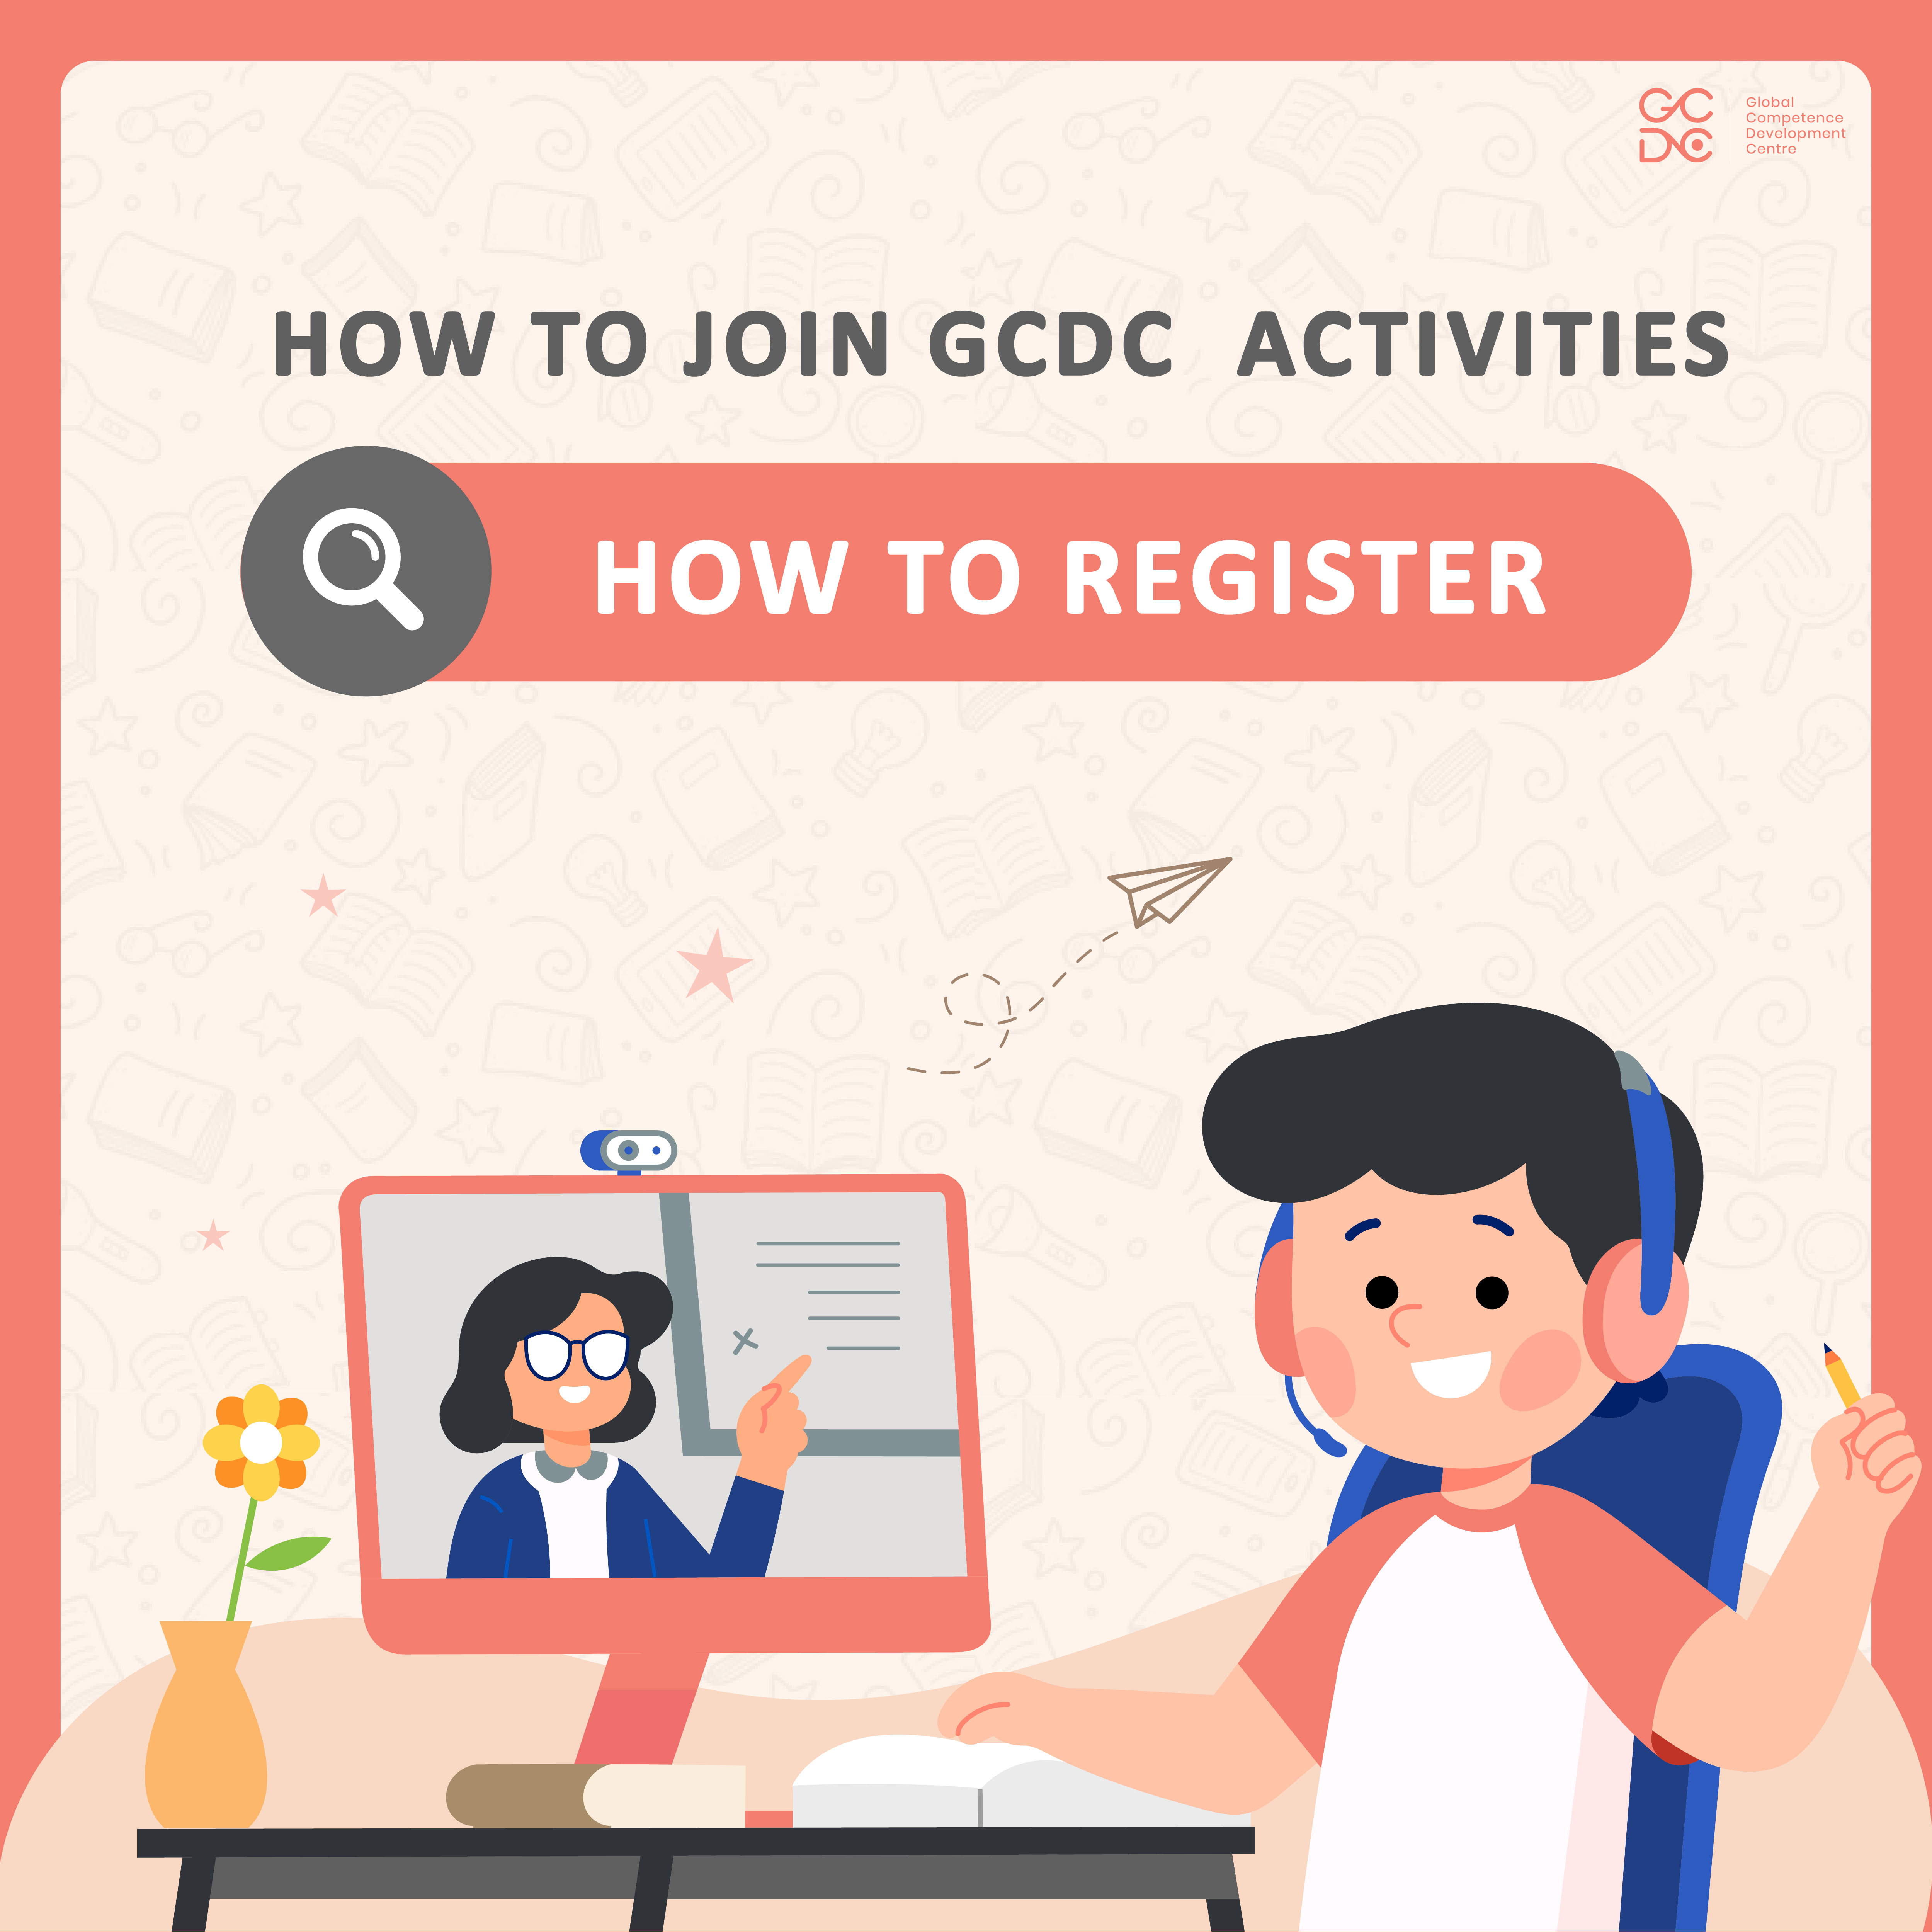 HOW TO JOIN GCDC ACTIVITIES (EP. 1)